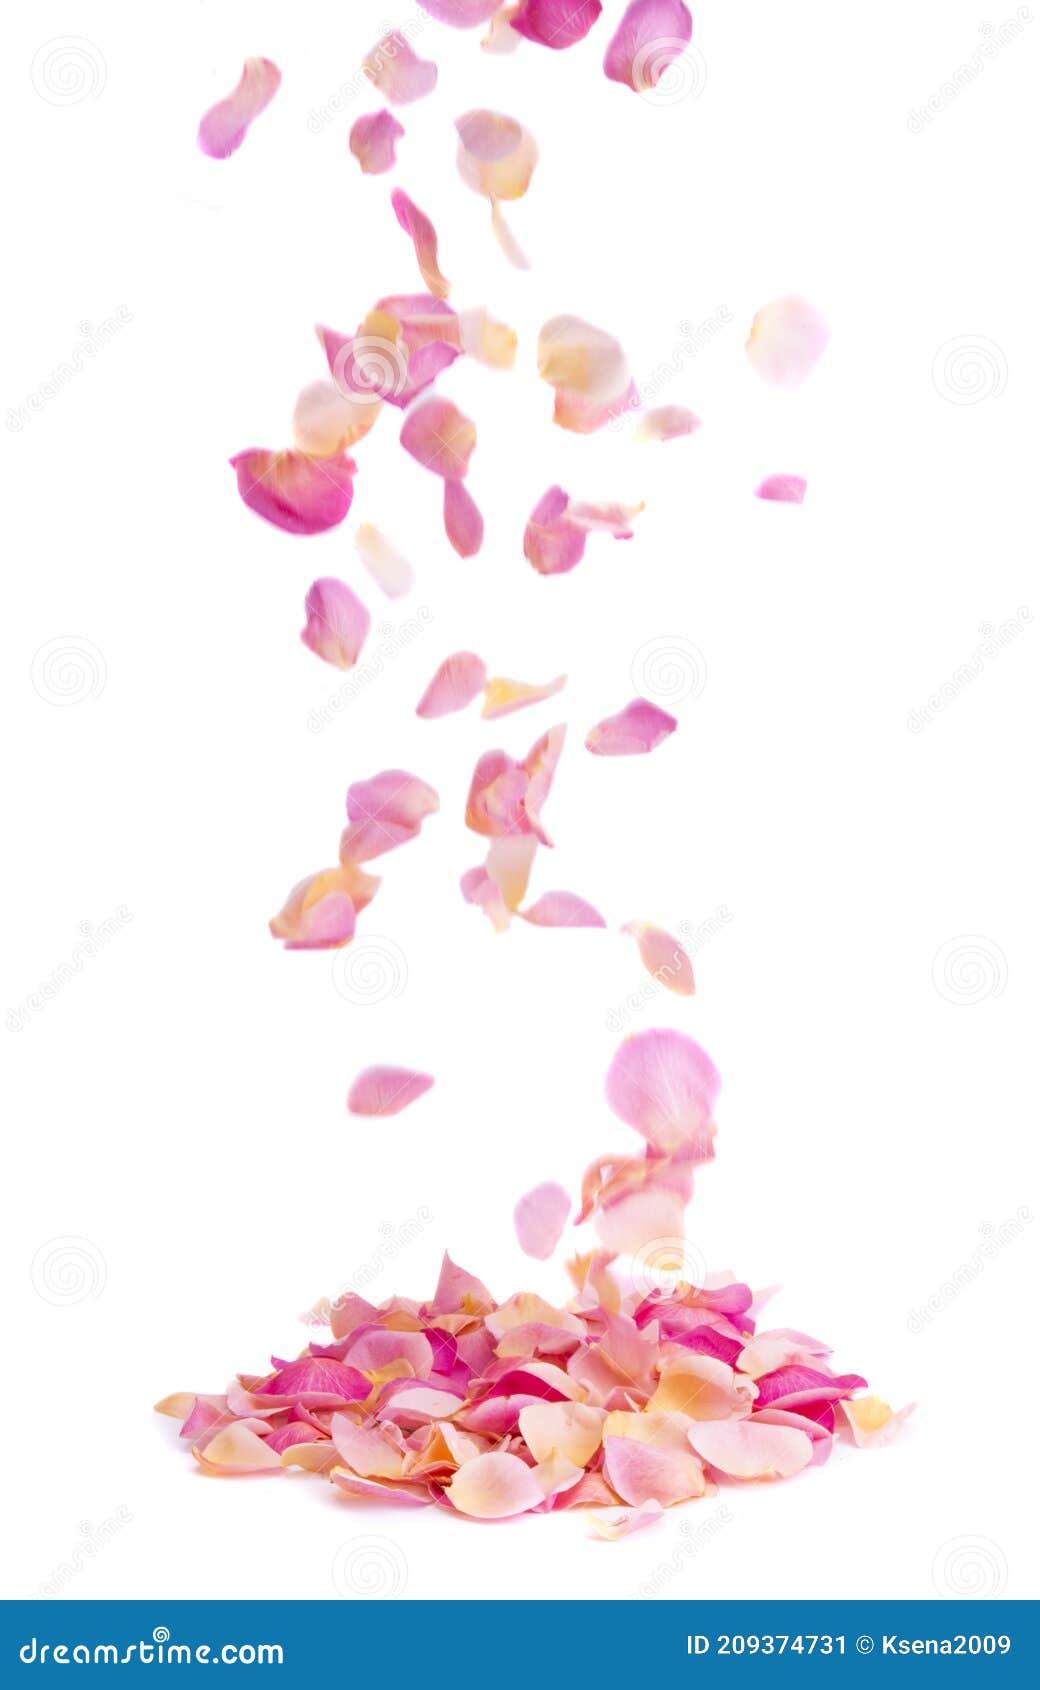 Rose Petals. Falling Rose Petals on the white , #Ad, #Petals, #Rose,  #white, #Falling #ad